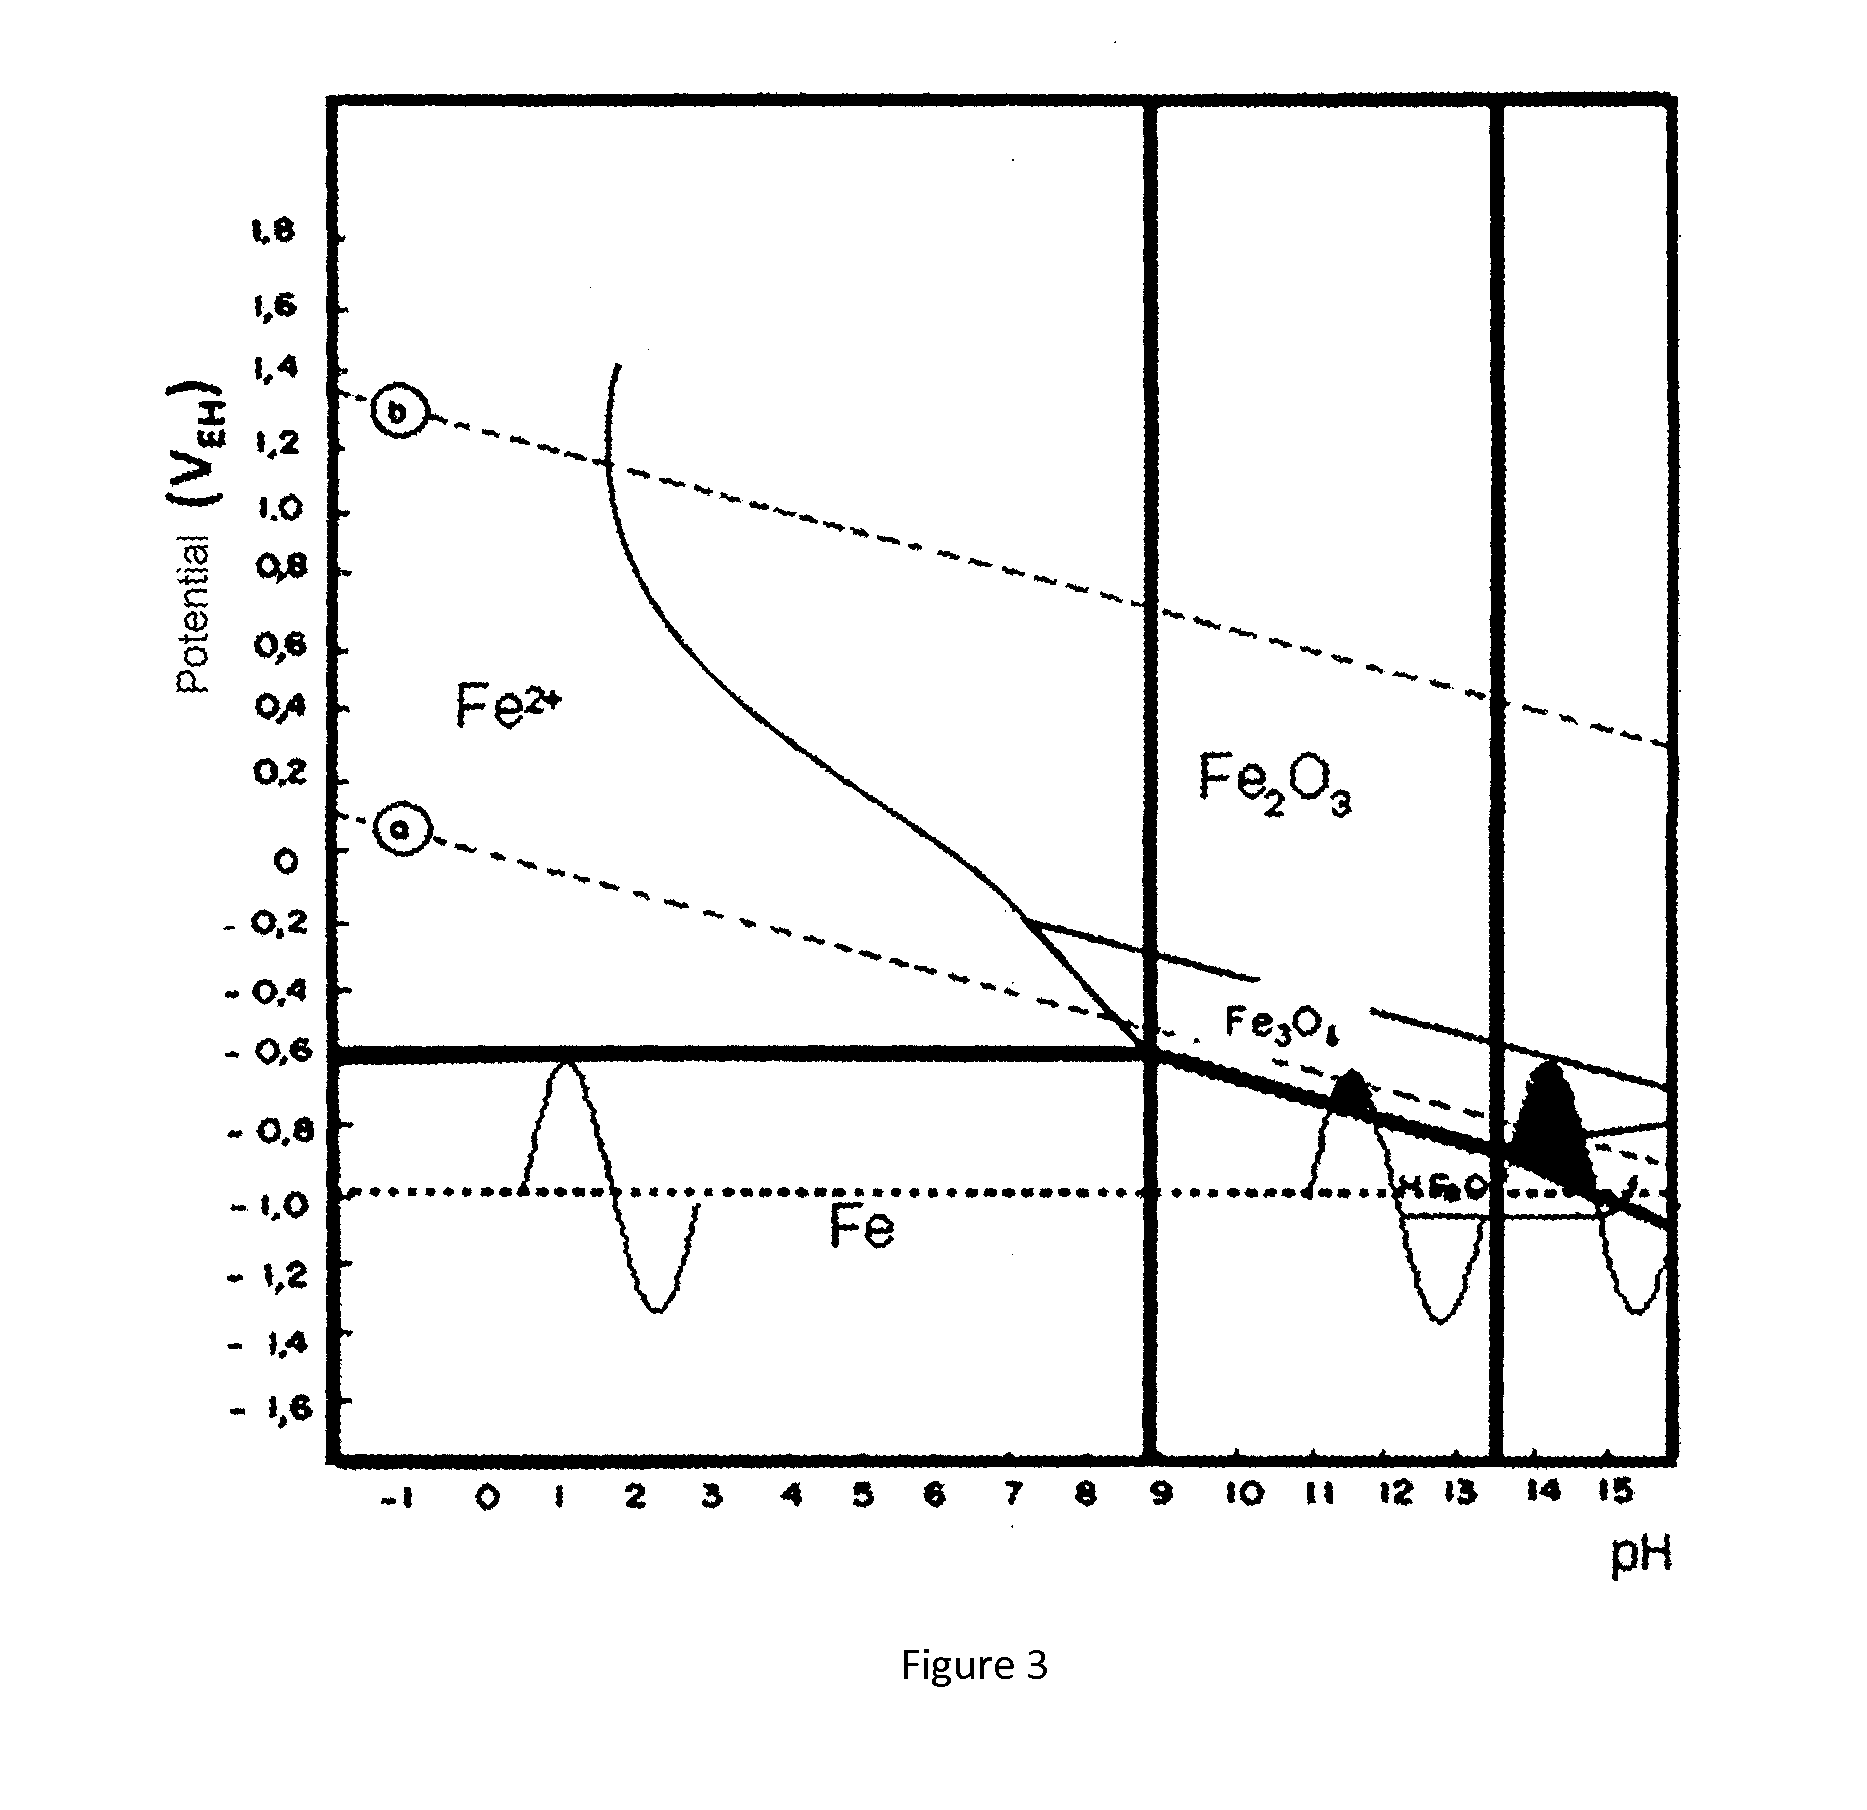 Method and equipment for identifying and measuring alternating current interference in buried ducts